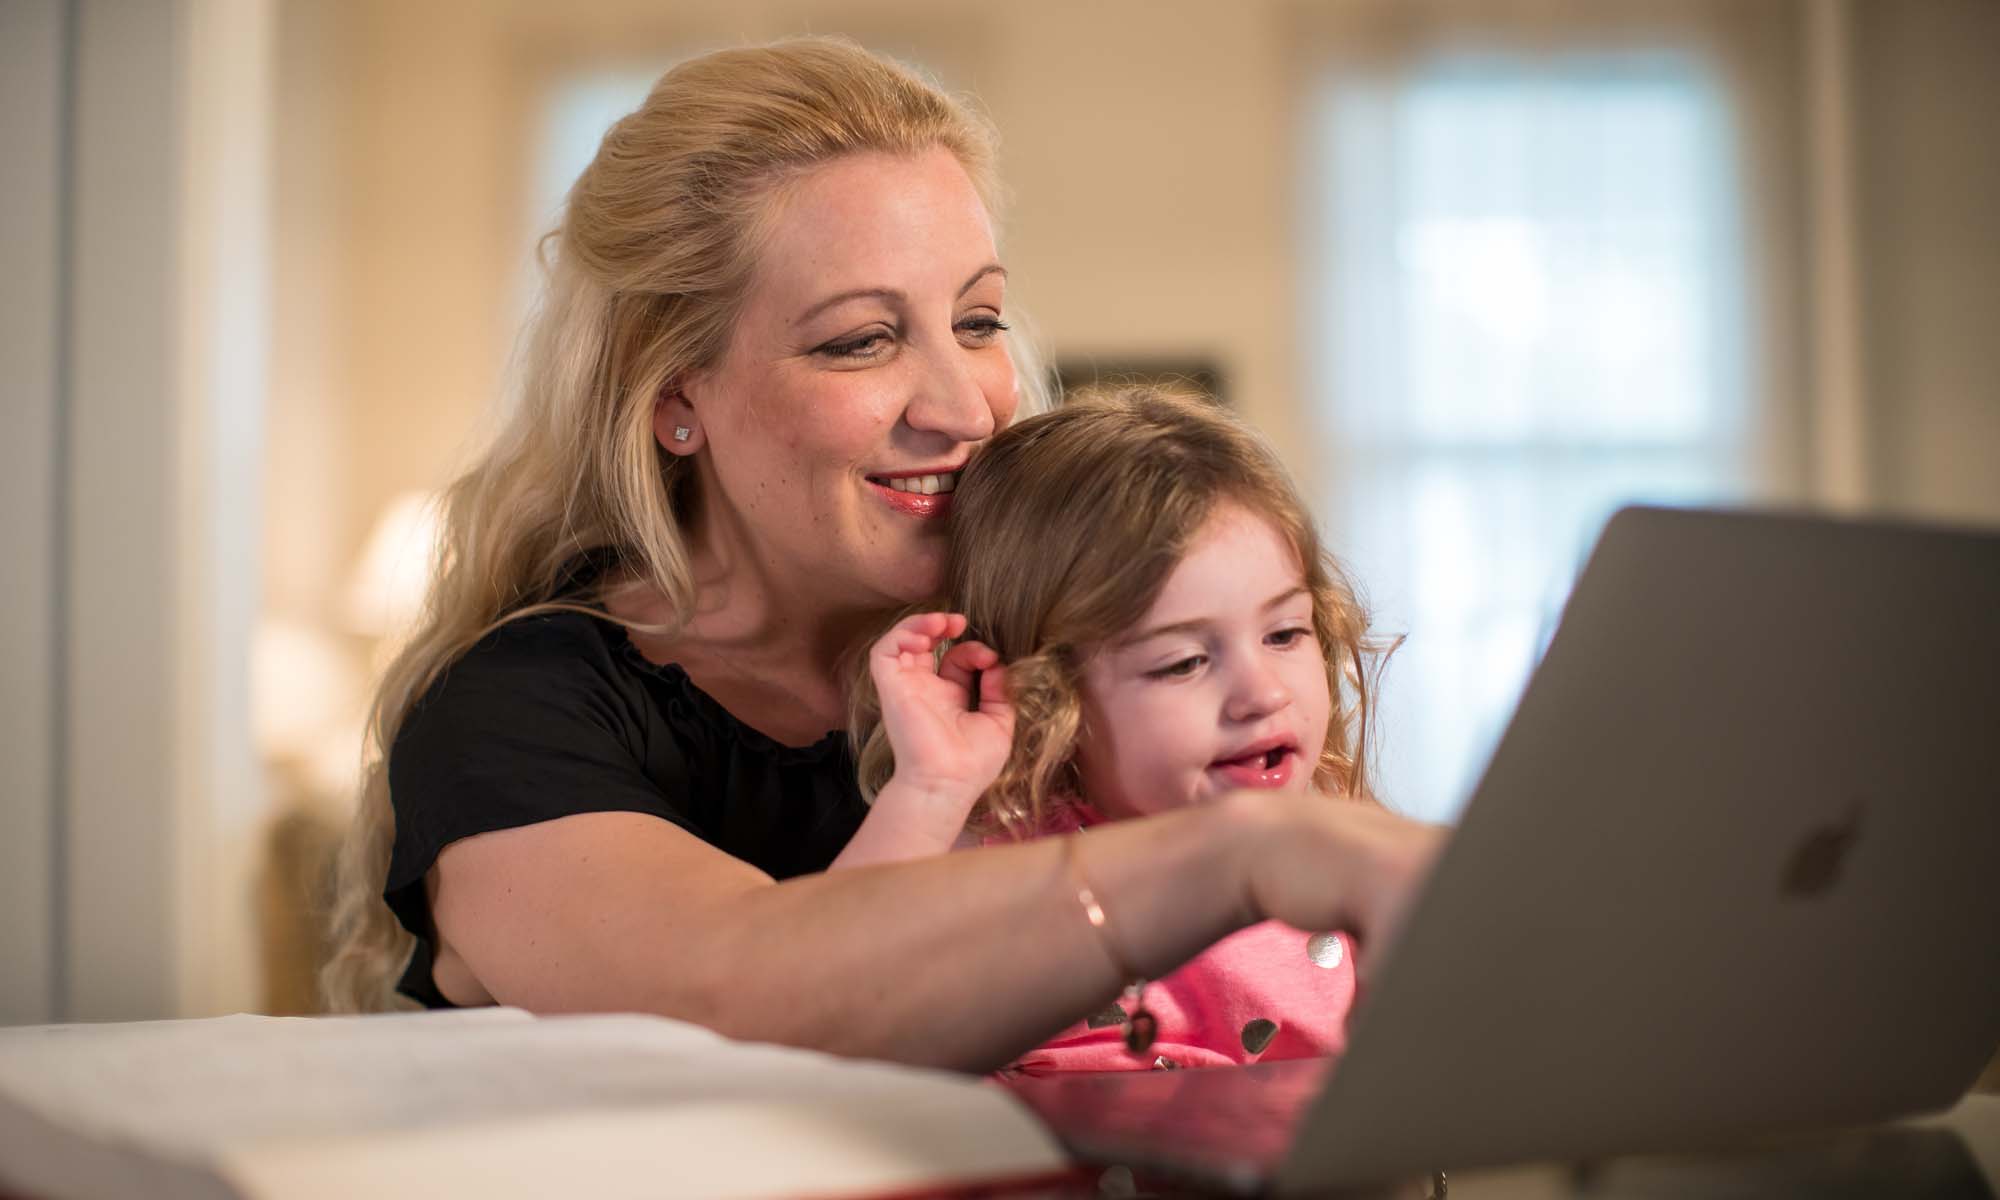 Mother working on laptop with daughter on her lap